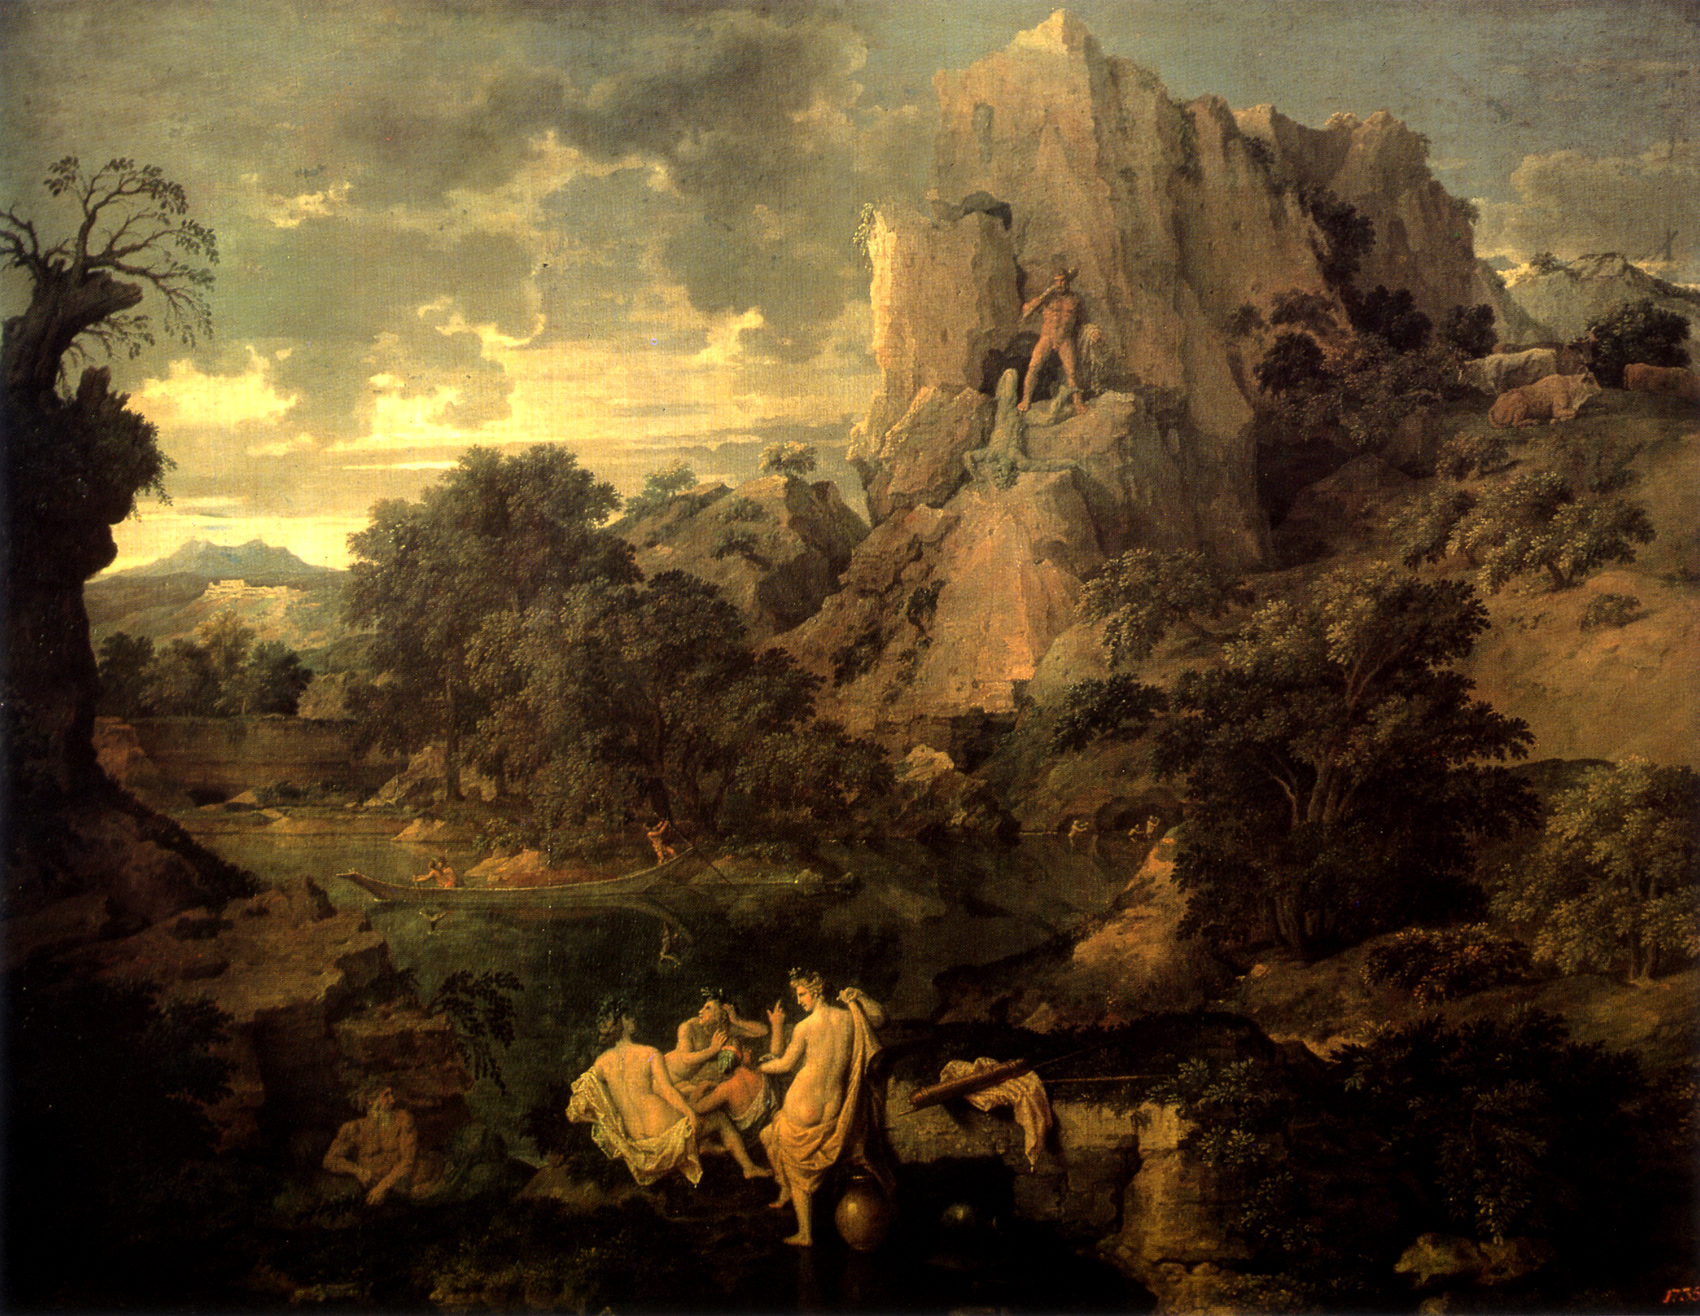 Landscape with Hercules and Cacus by Nicolas Poussin - 1658-1659 - 156 x 202 cm The Pushkin Museum of Fine Art